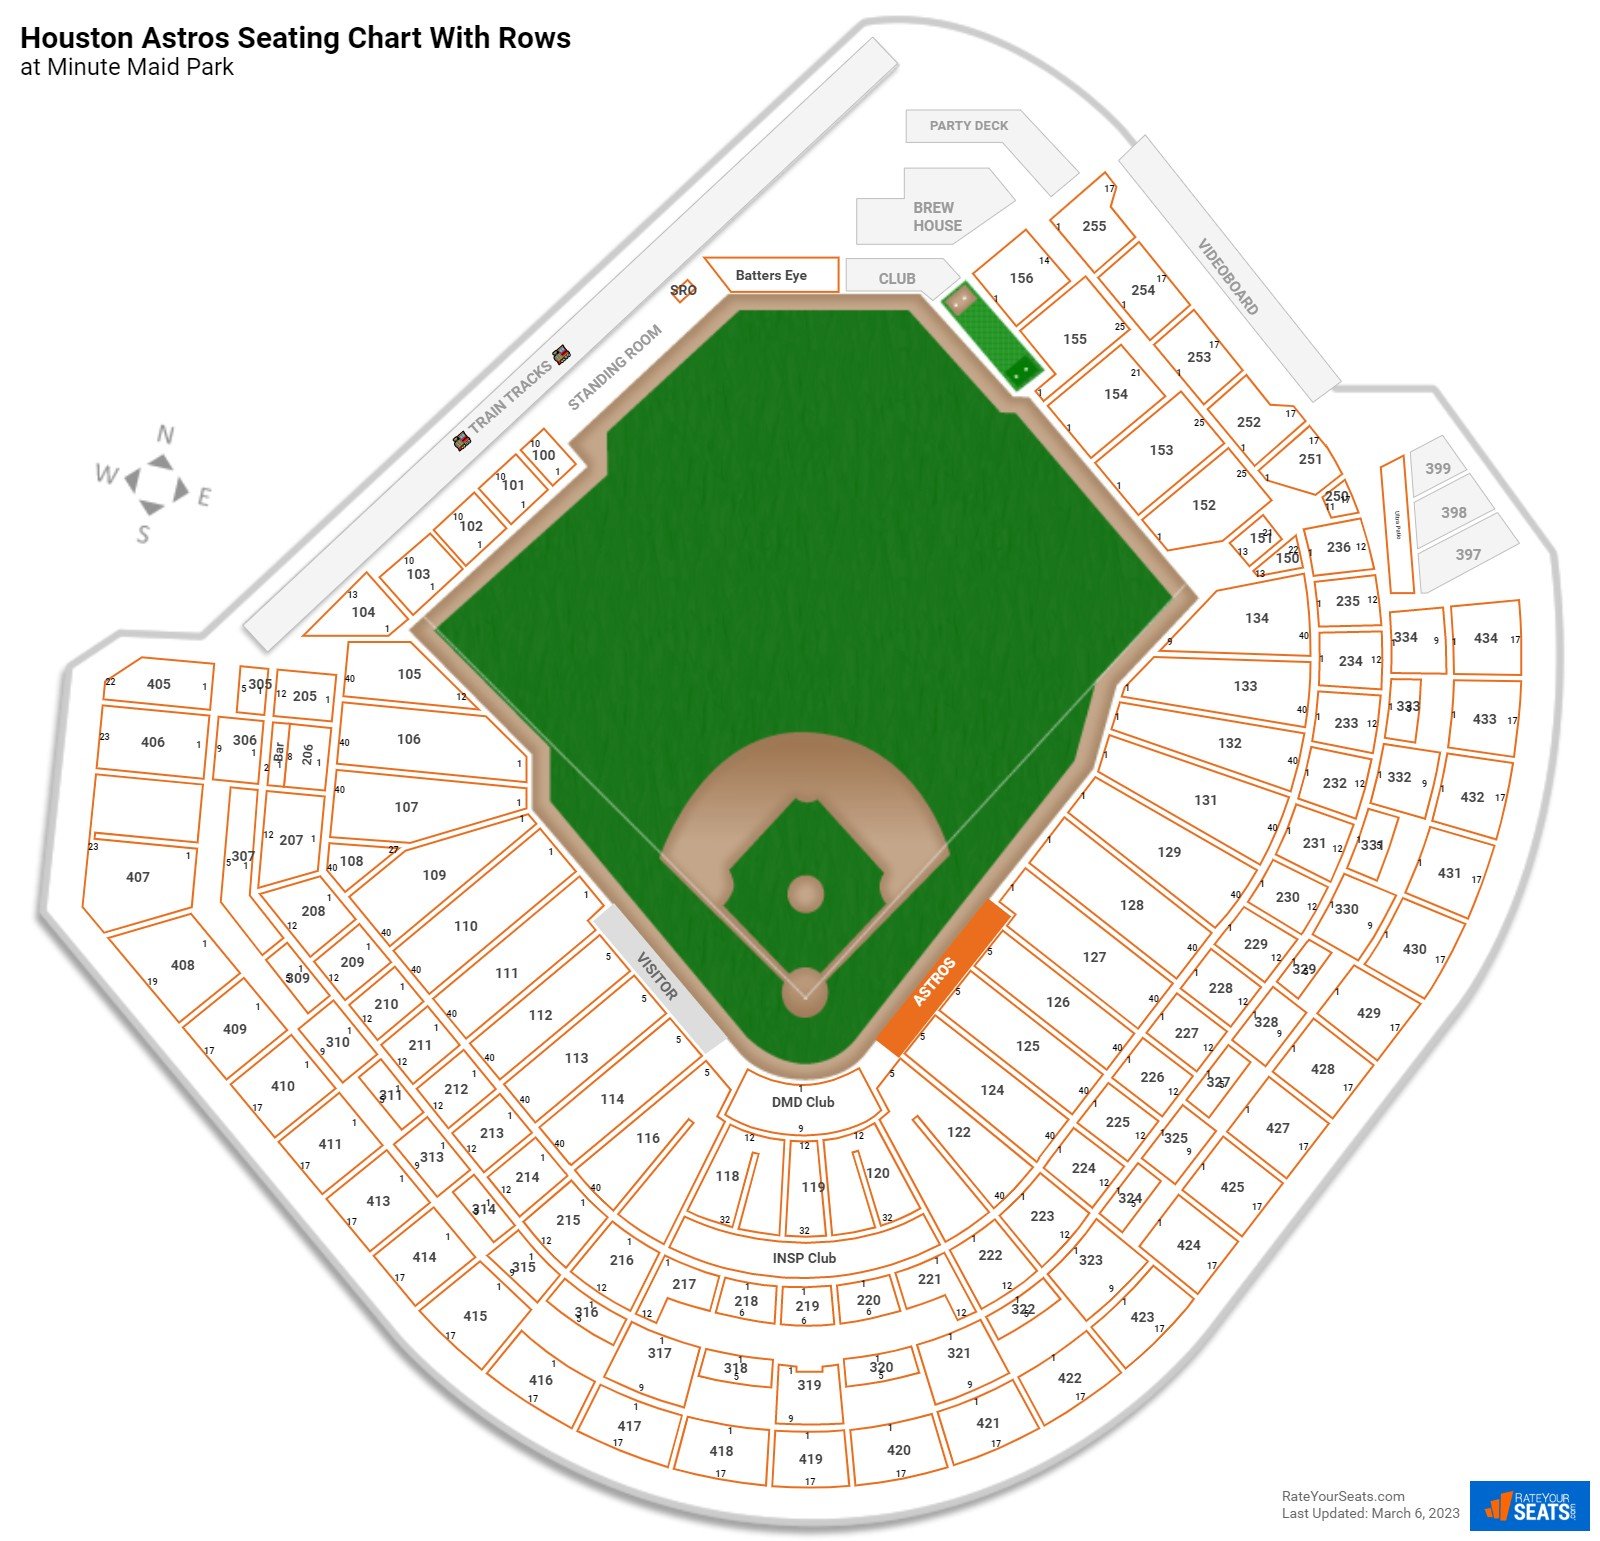 Minute Maid Park seating chart with row numbers